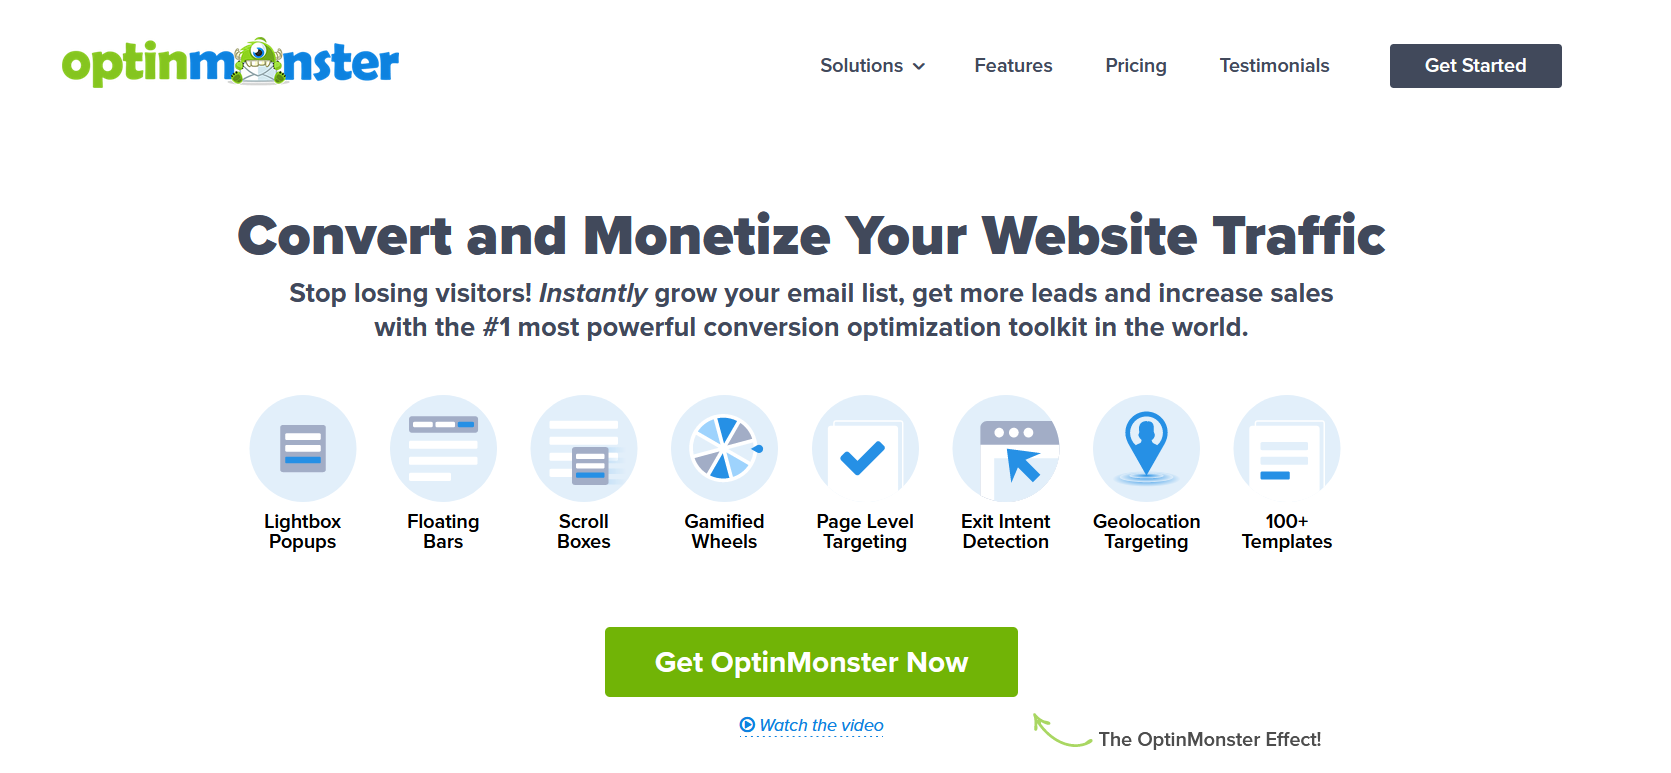 OptinMonster Lead Generation Software: A User Guide